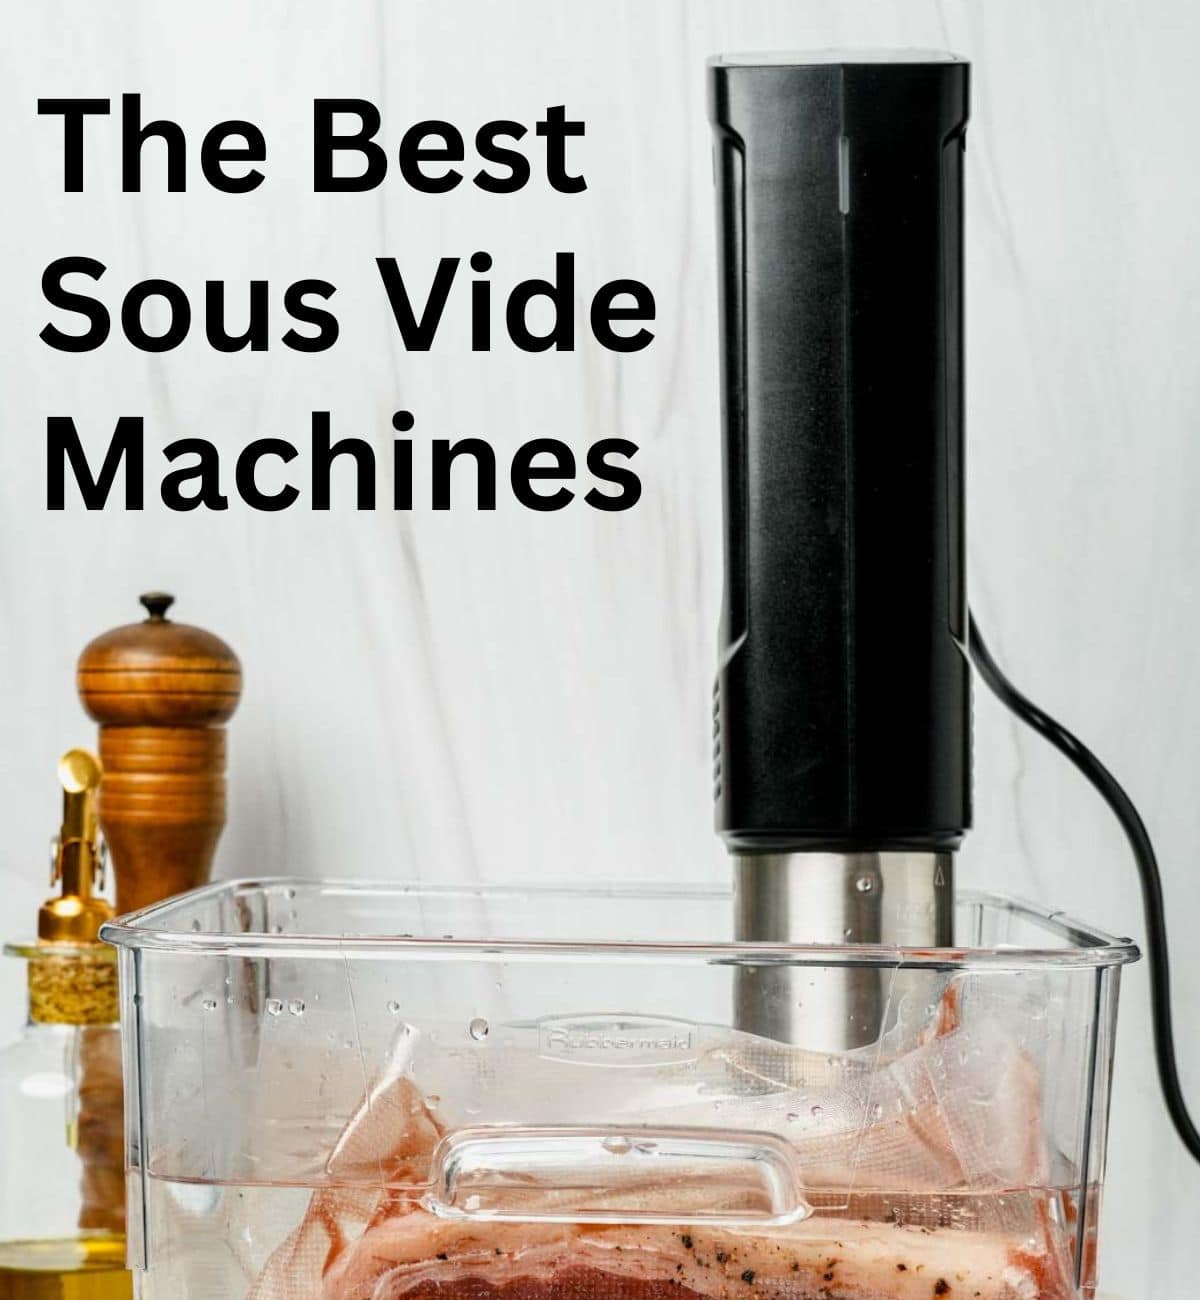 https://www.wenthere8this.com/wp-content/uploads/2023/09/The-Best-Sous-Vide-Machines.jpg